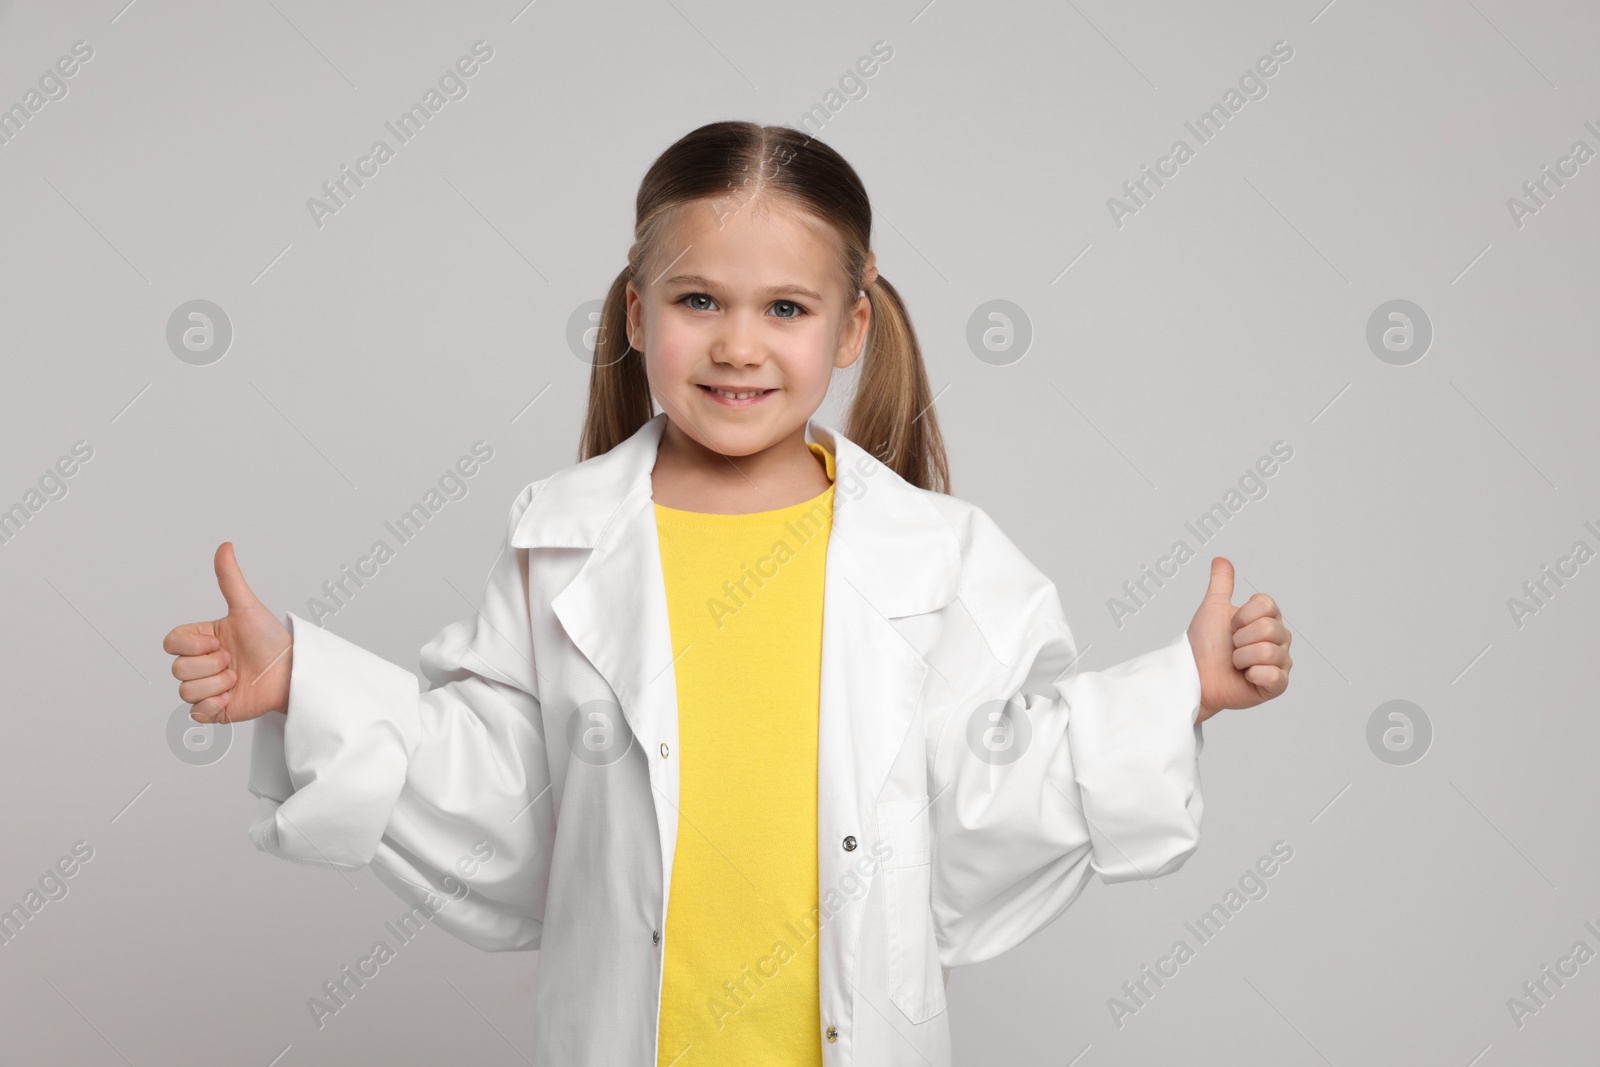 Photo of Little girl in medical uniform showing thumbs up on light grey background